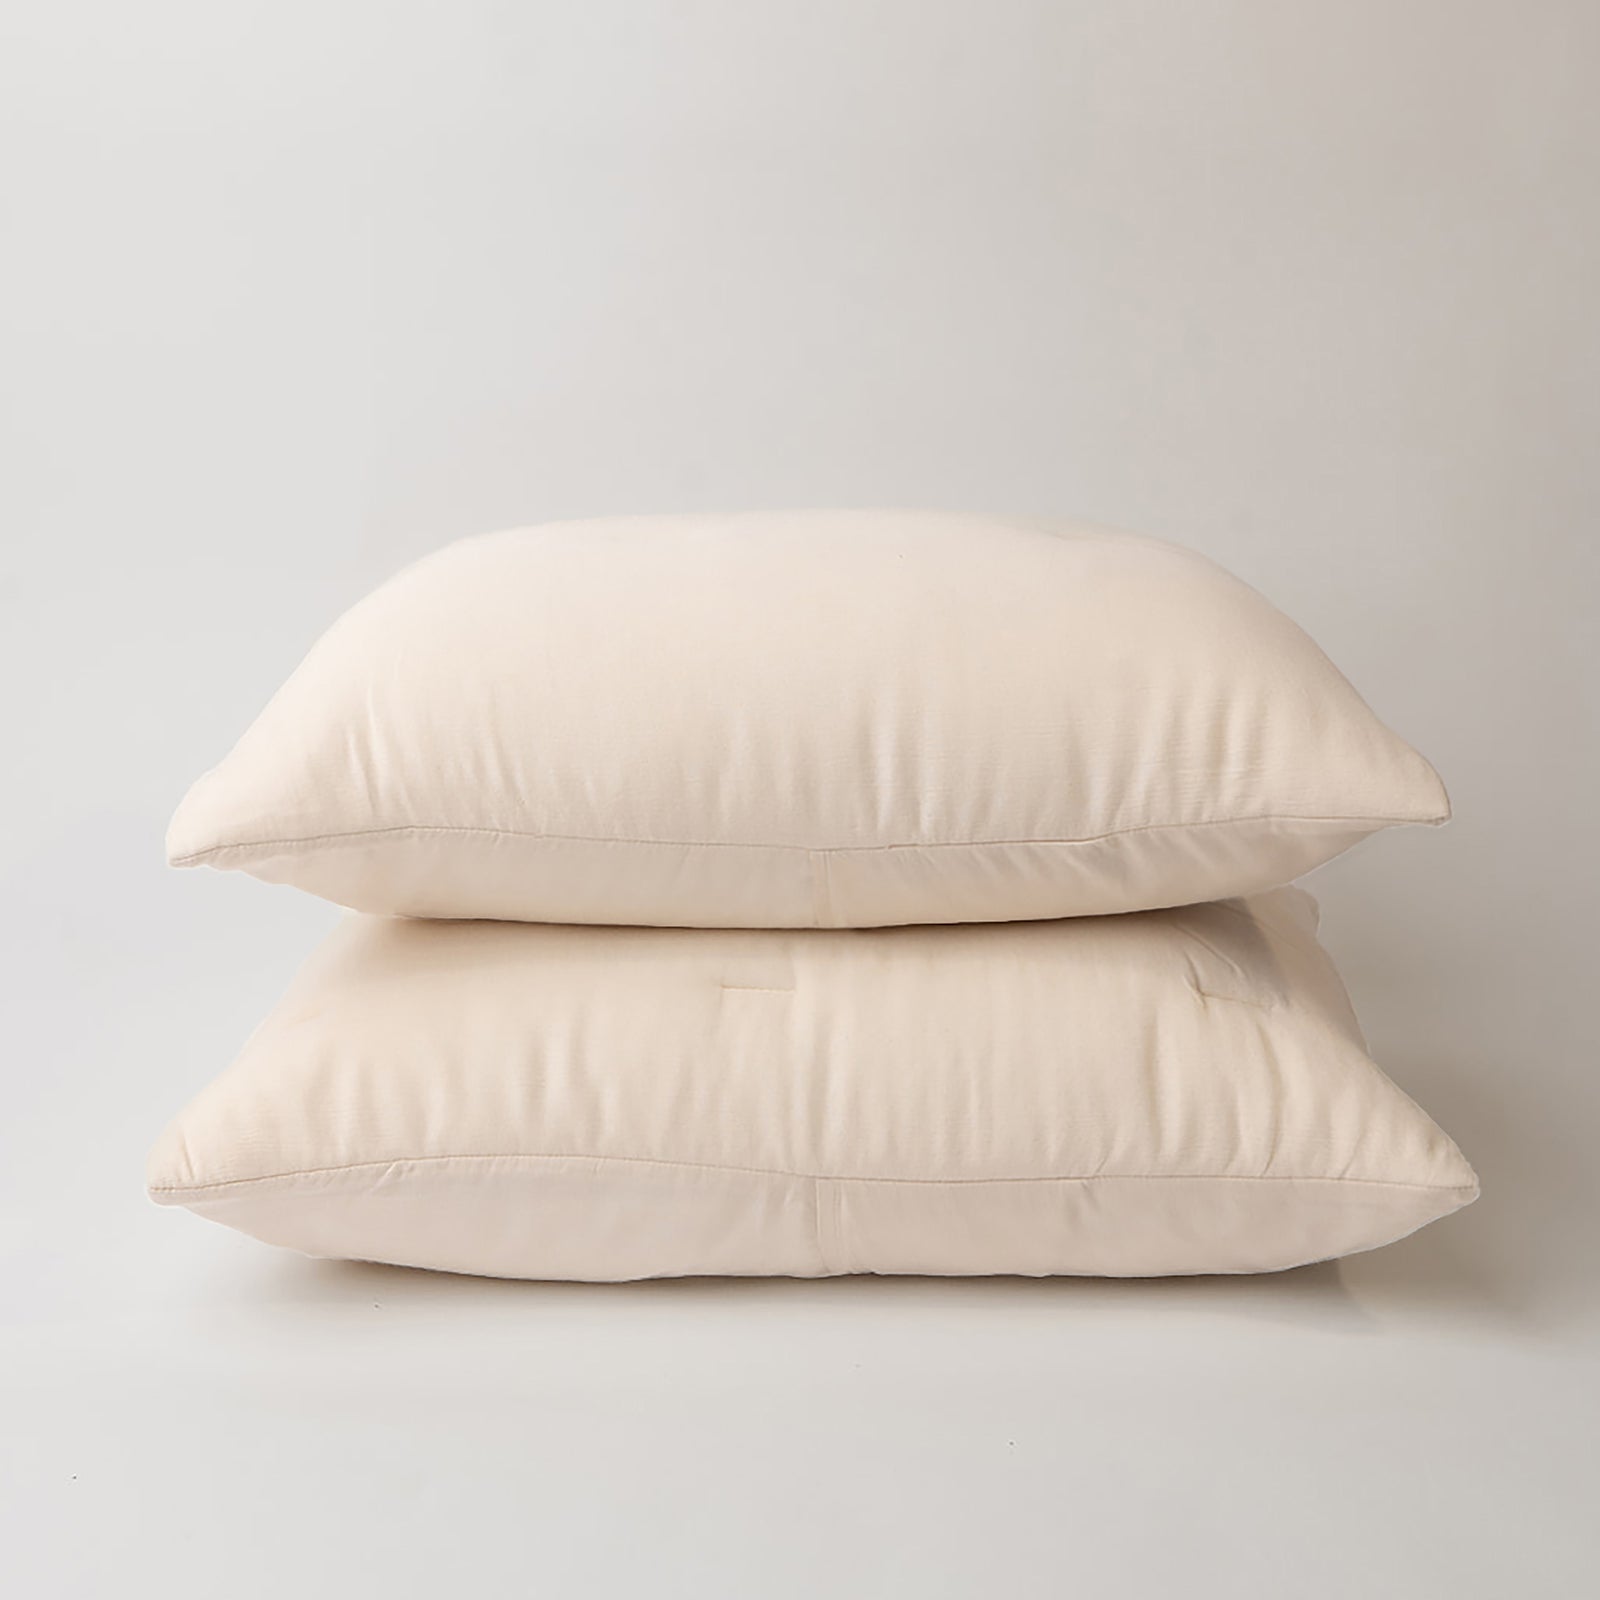 Buttermilk Aire Bamboo Puckered Shams king size. The sham is resting on a white background